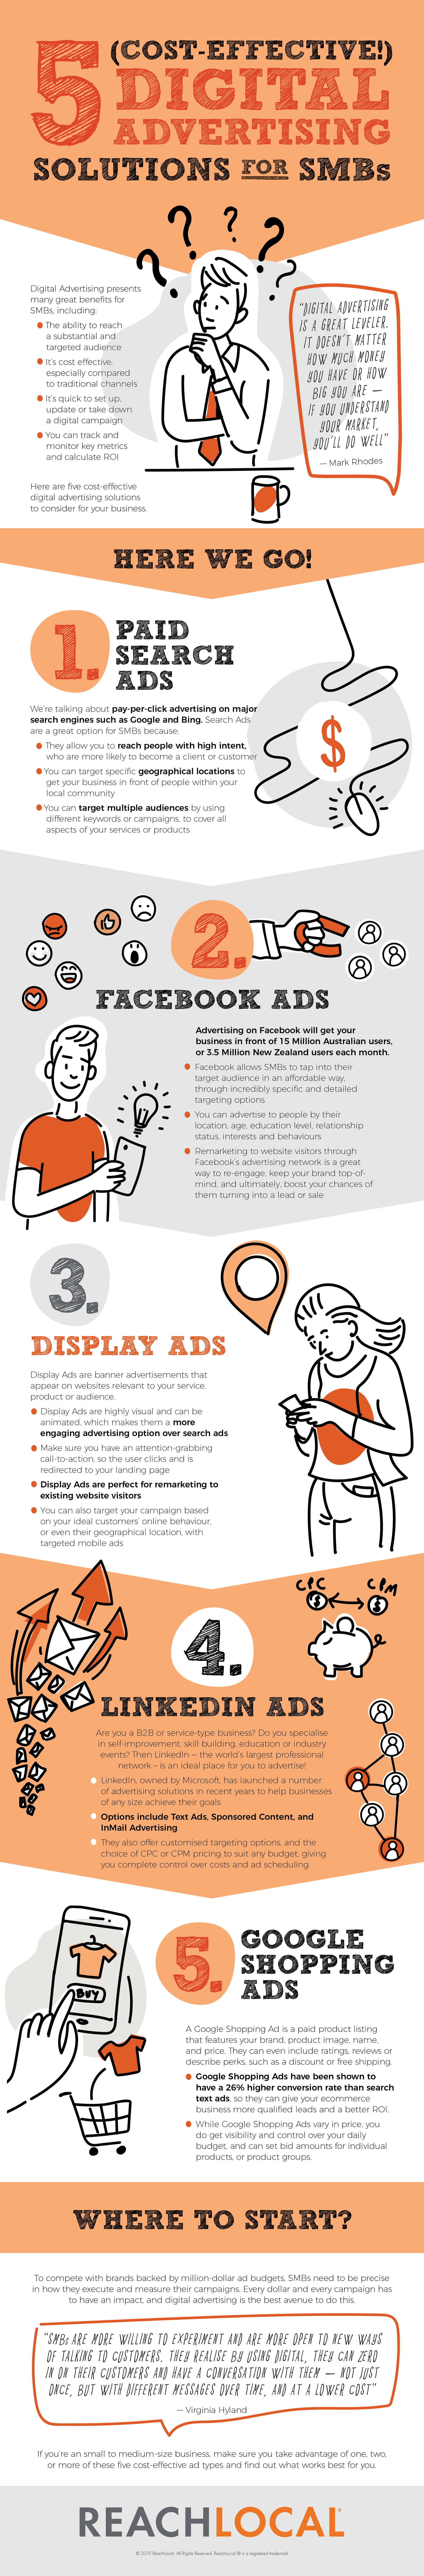 reachlocal infographic digital marketing for small and medium business